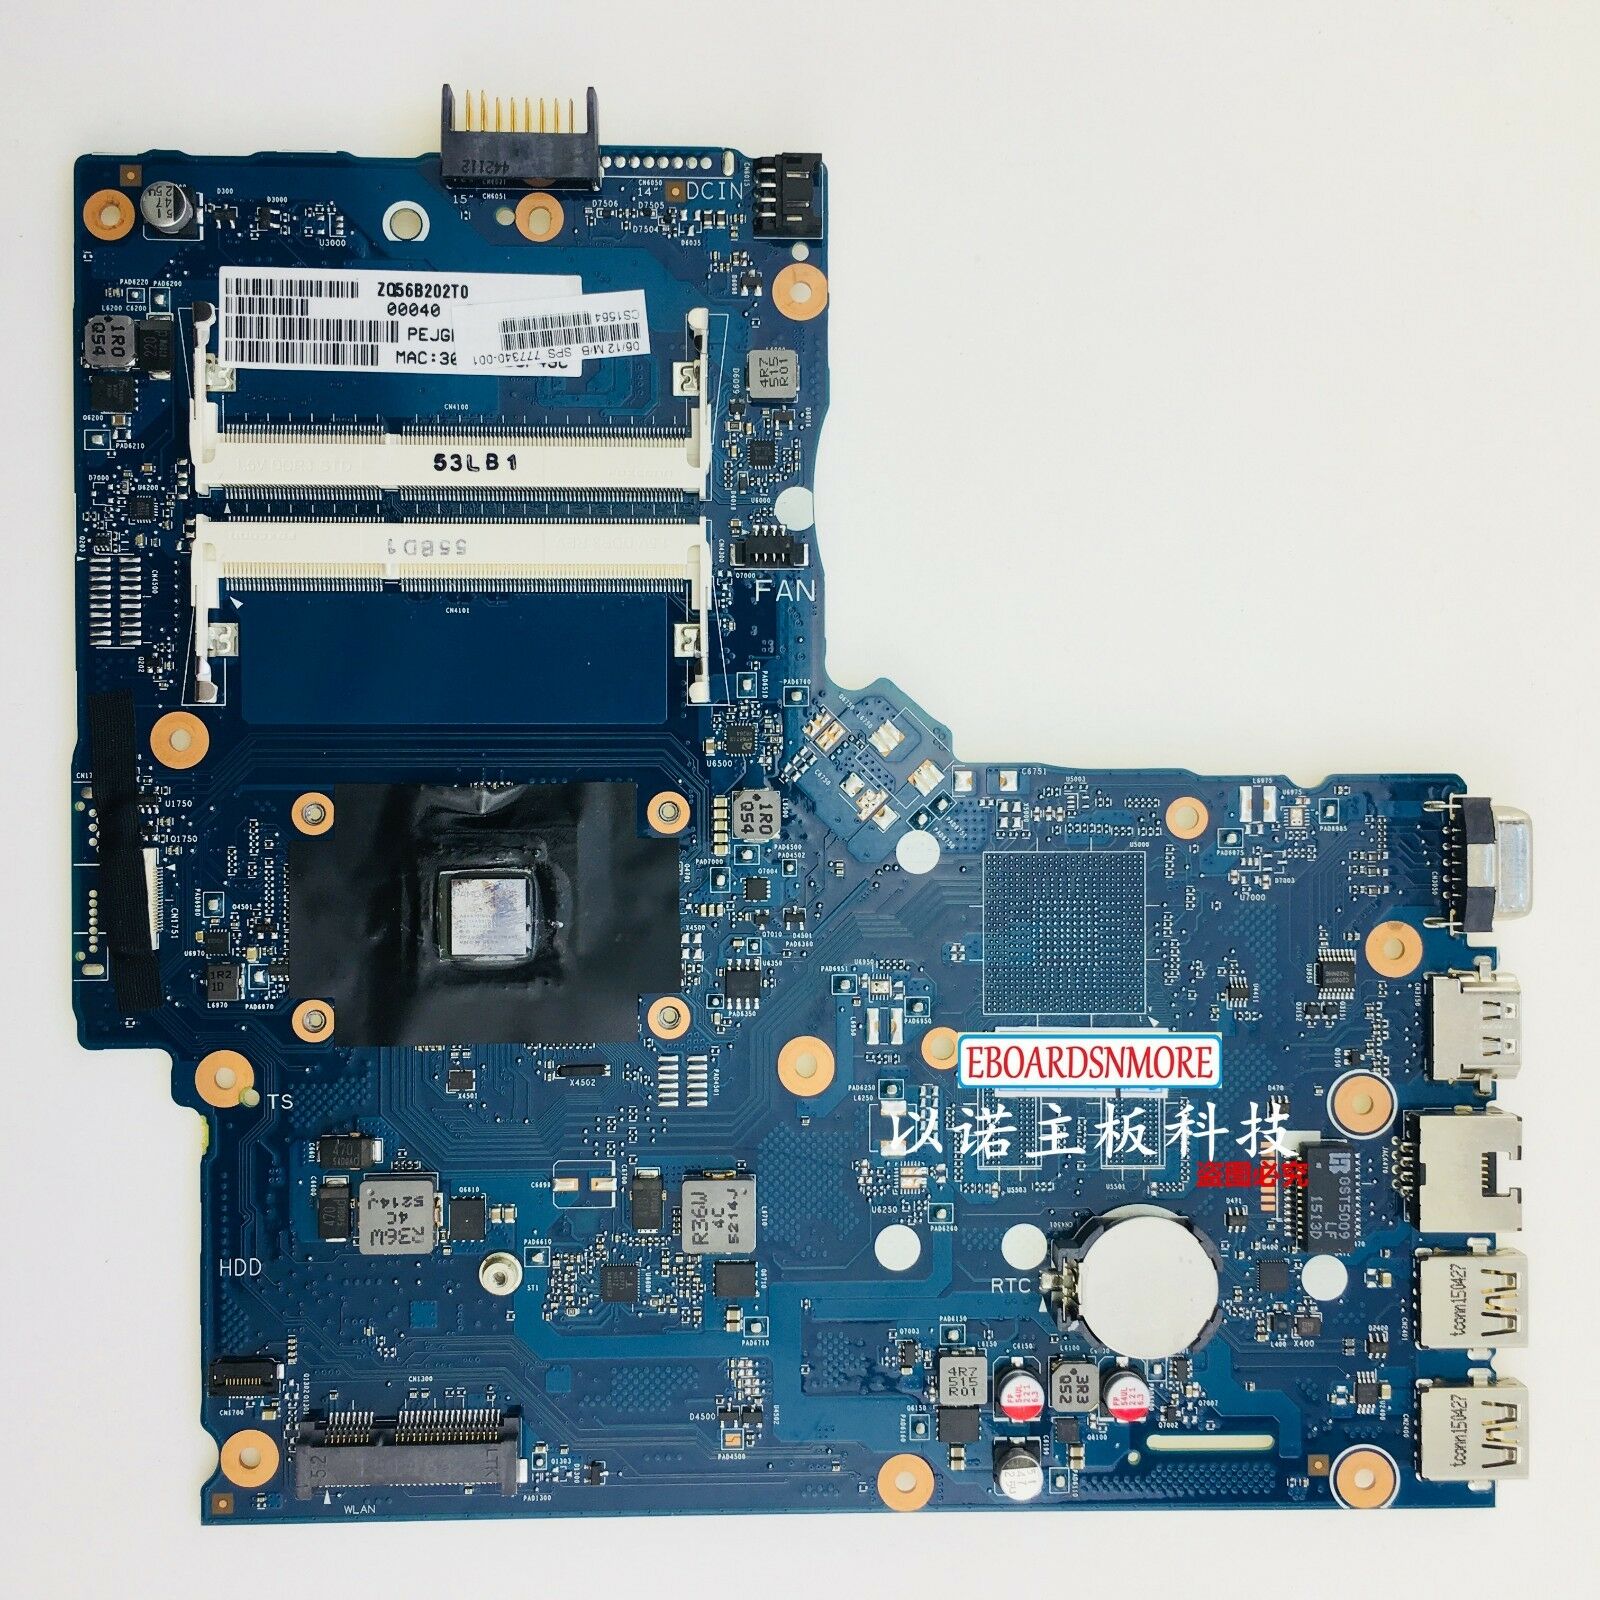 HP 355 G2 Laptop Motherboard,777340-001 ICEA10-6050A2612501 W/ A8-6410 CPU Compatible CPU Brand: AMD Memor - Click Image to Close